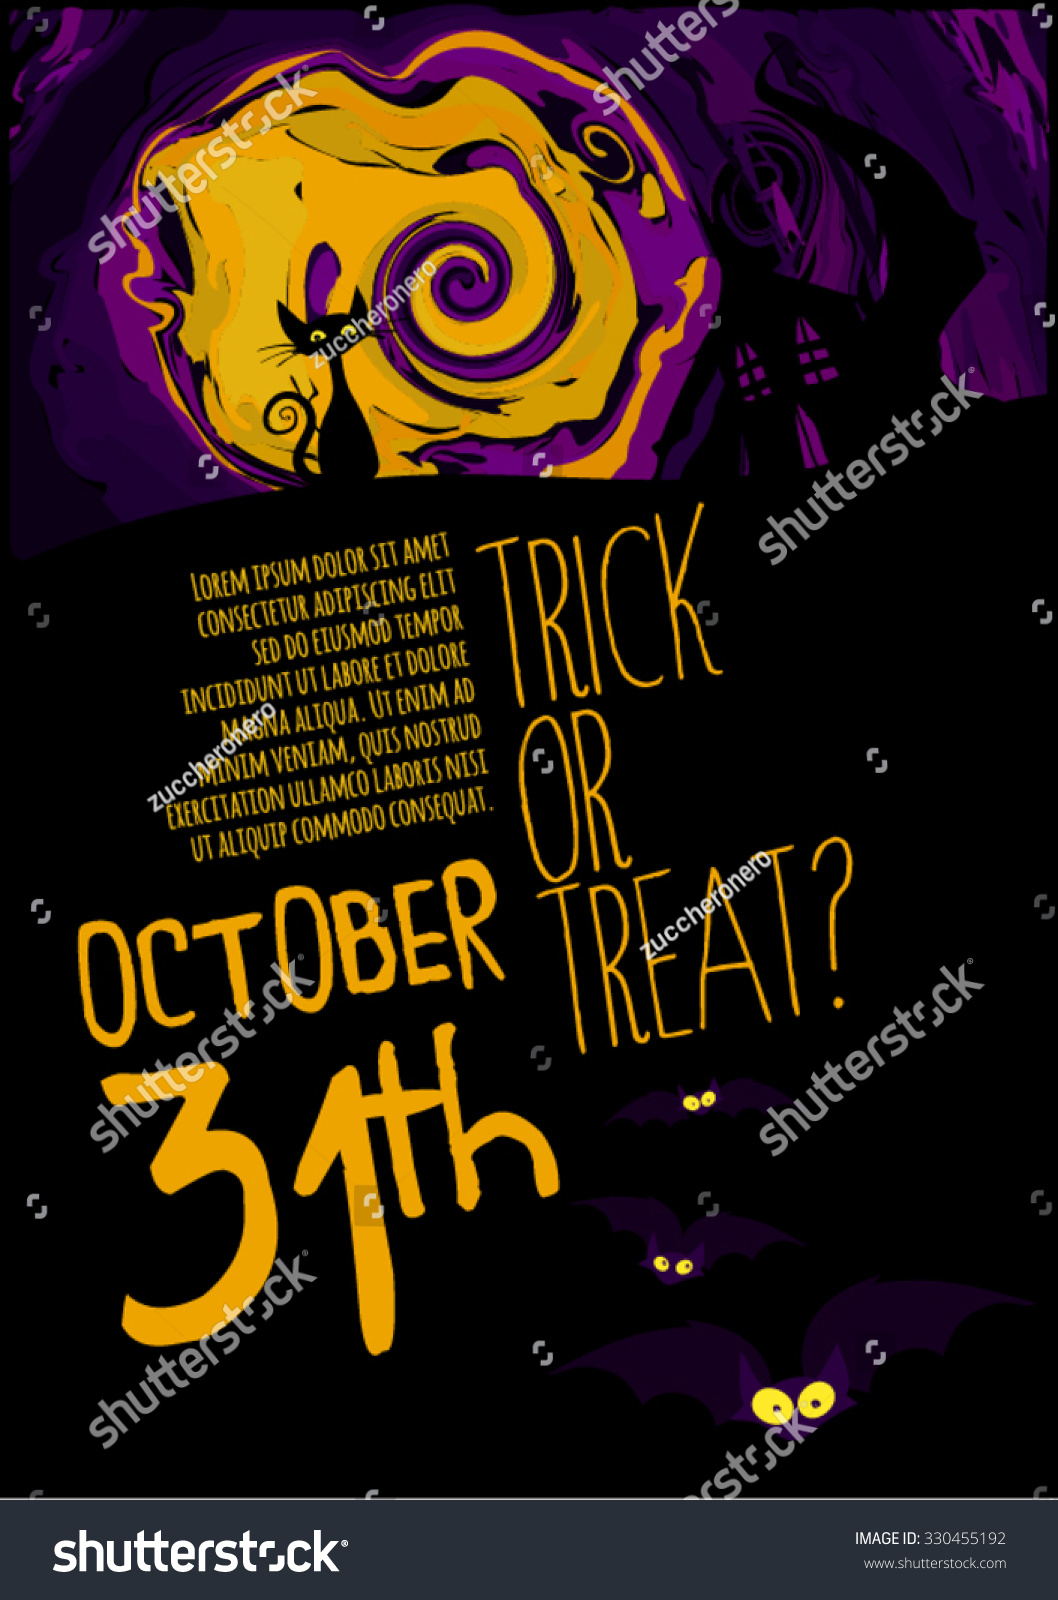 Halloween Party Flyer Halloween Poster Layout Stock Vector Royalty Free 330455192